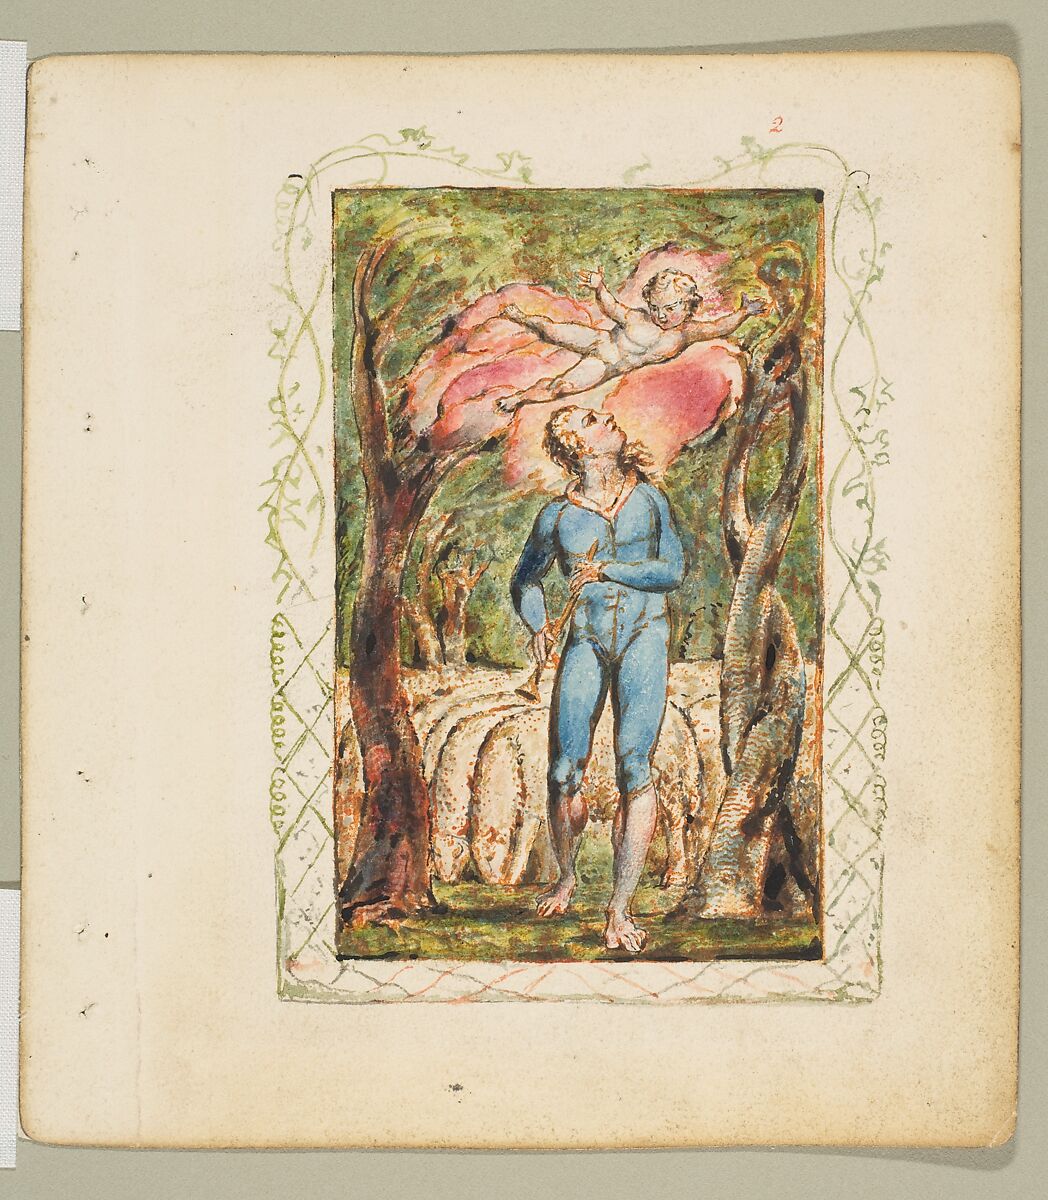 Songs of Innocence: Frontispiece, William Blake, Relief etching printed in orange-brown ink and hand-colored with watercolor and shell gold